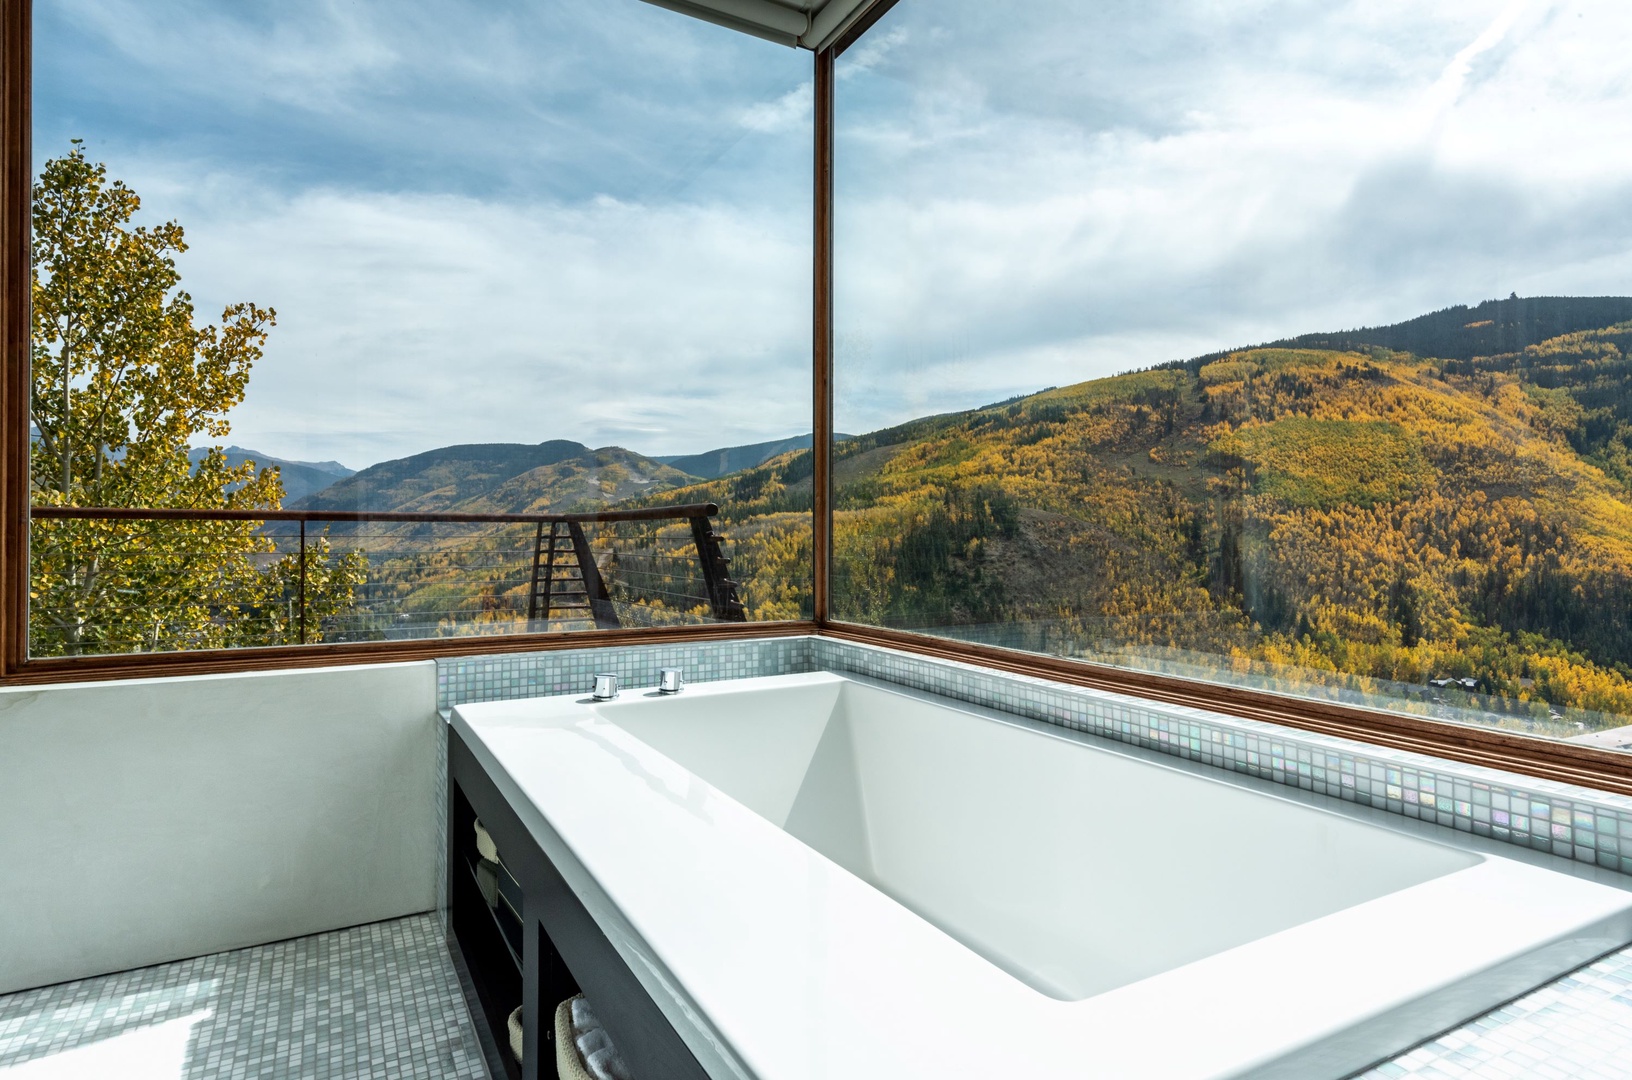 Take in the spectacular views from every angle of the 3rd-floor king ensuite